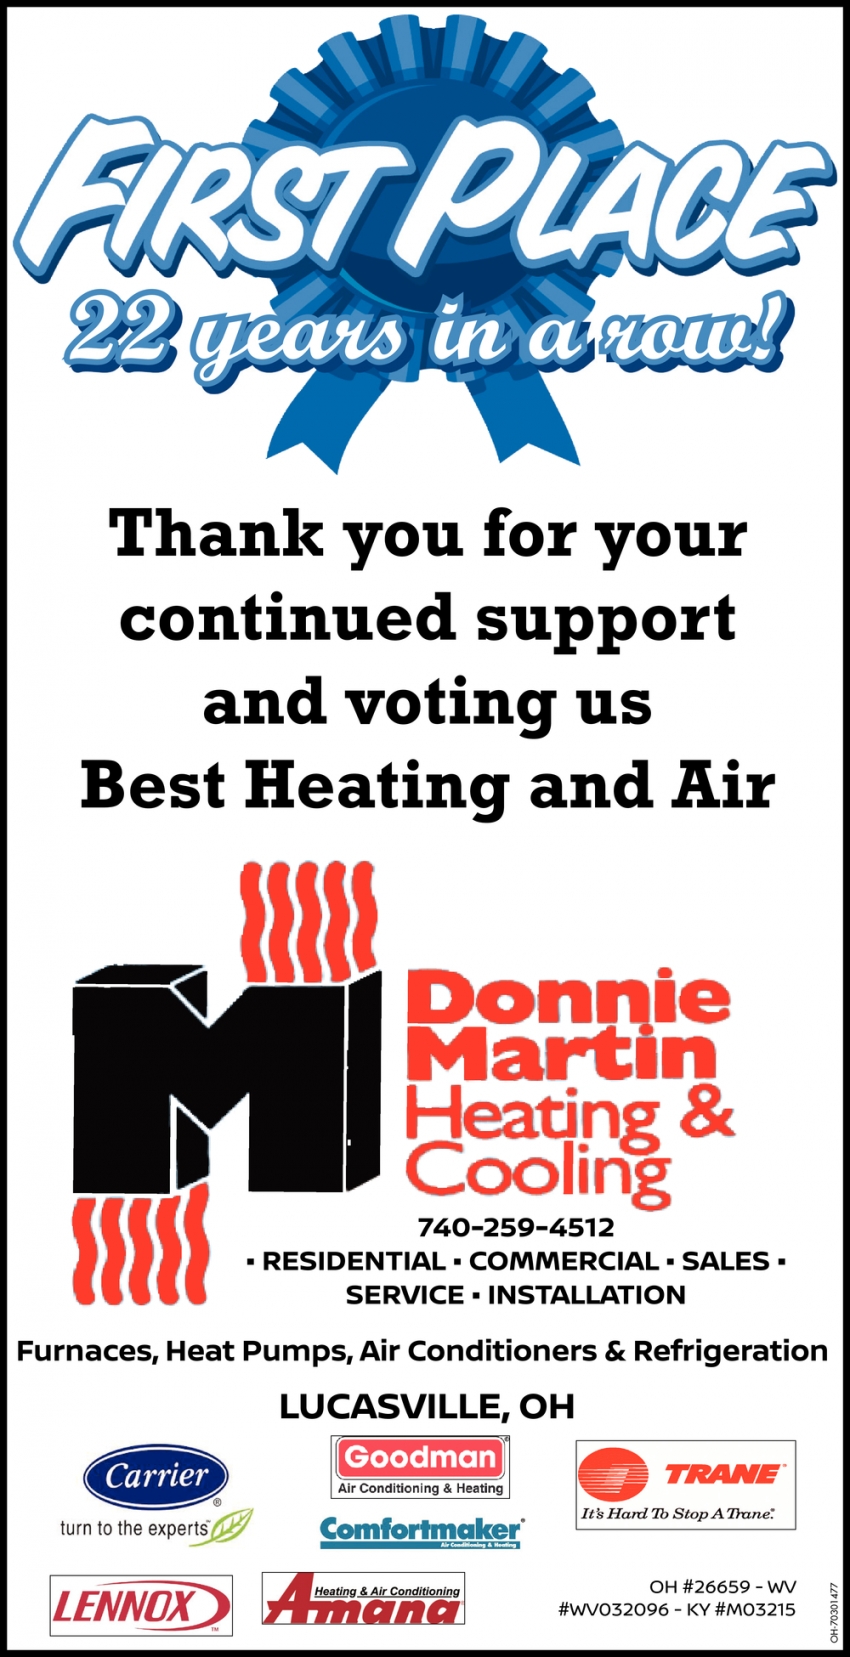 Best Heating and Air